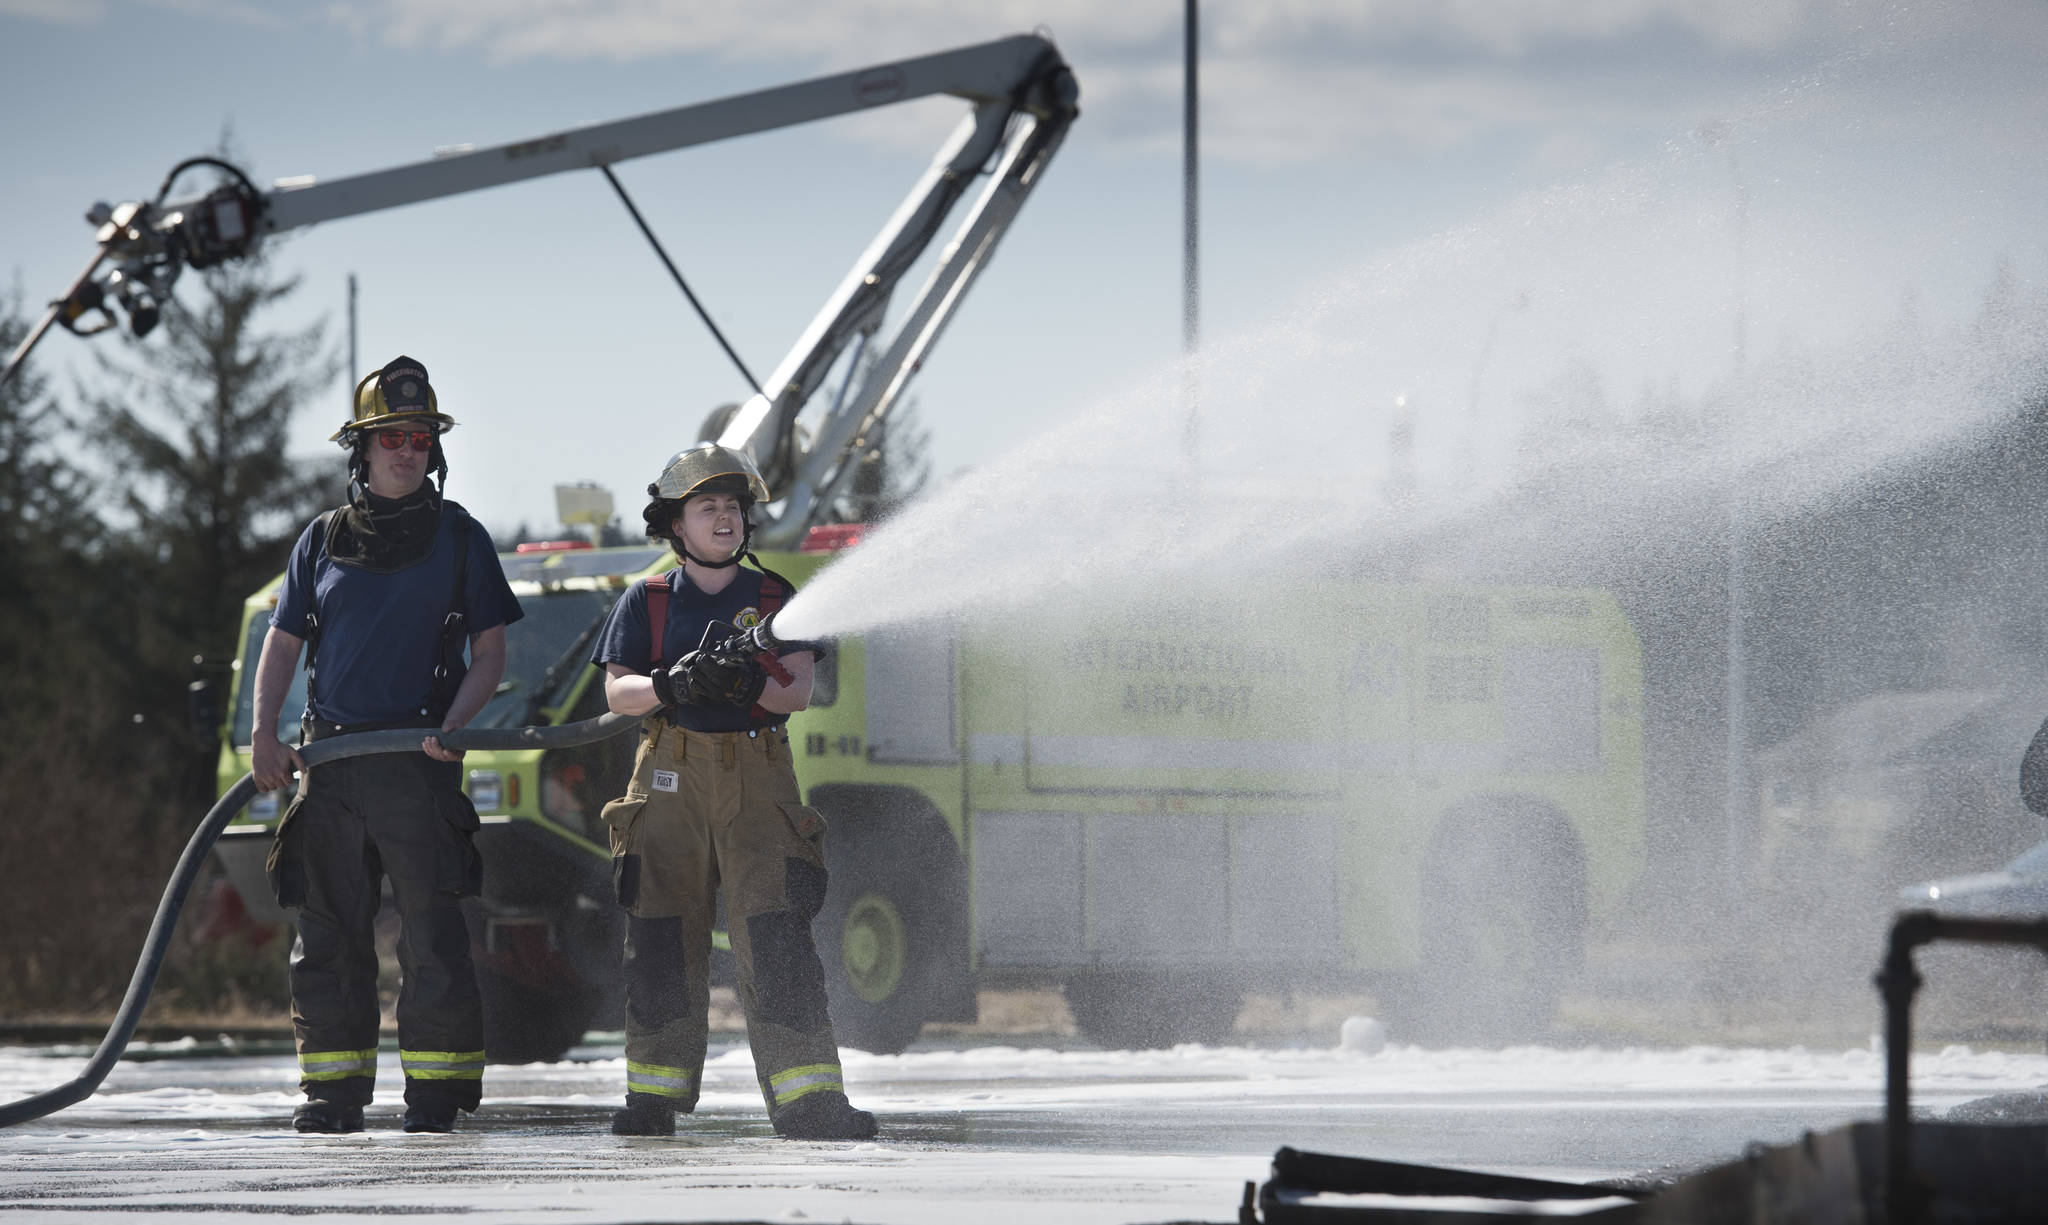 In this file photo from April 13, 2017, firefighters spray foam during a drill at the Hagevig Regional Fire Training Center. The city is sampling groundwater and soil, looking for chemicals in the environment that are mainly associated with the use of firefighting foams used in training activities, according to the Alaska Department of Environmental Conservation. (Michael Penn | Juneau Empire File)